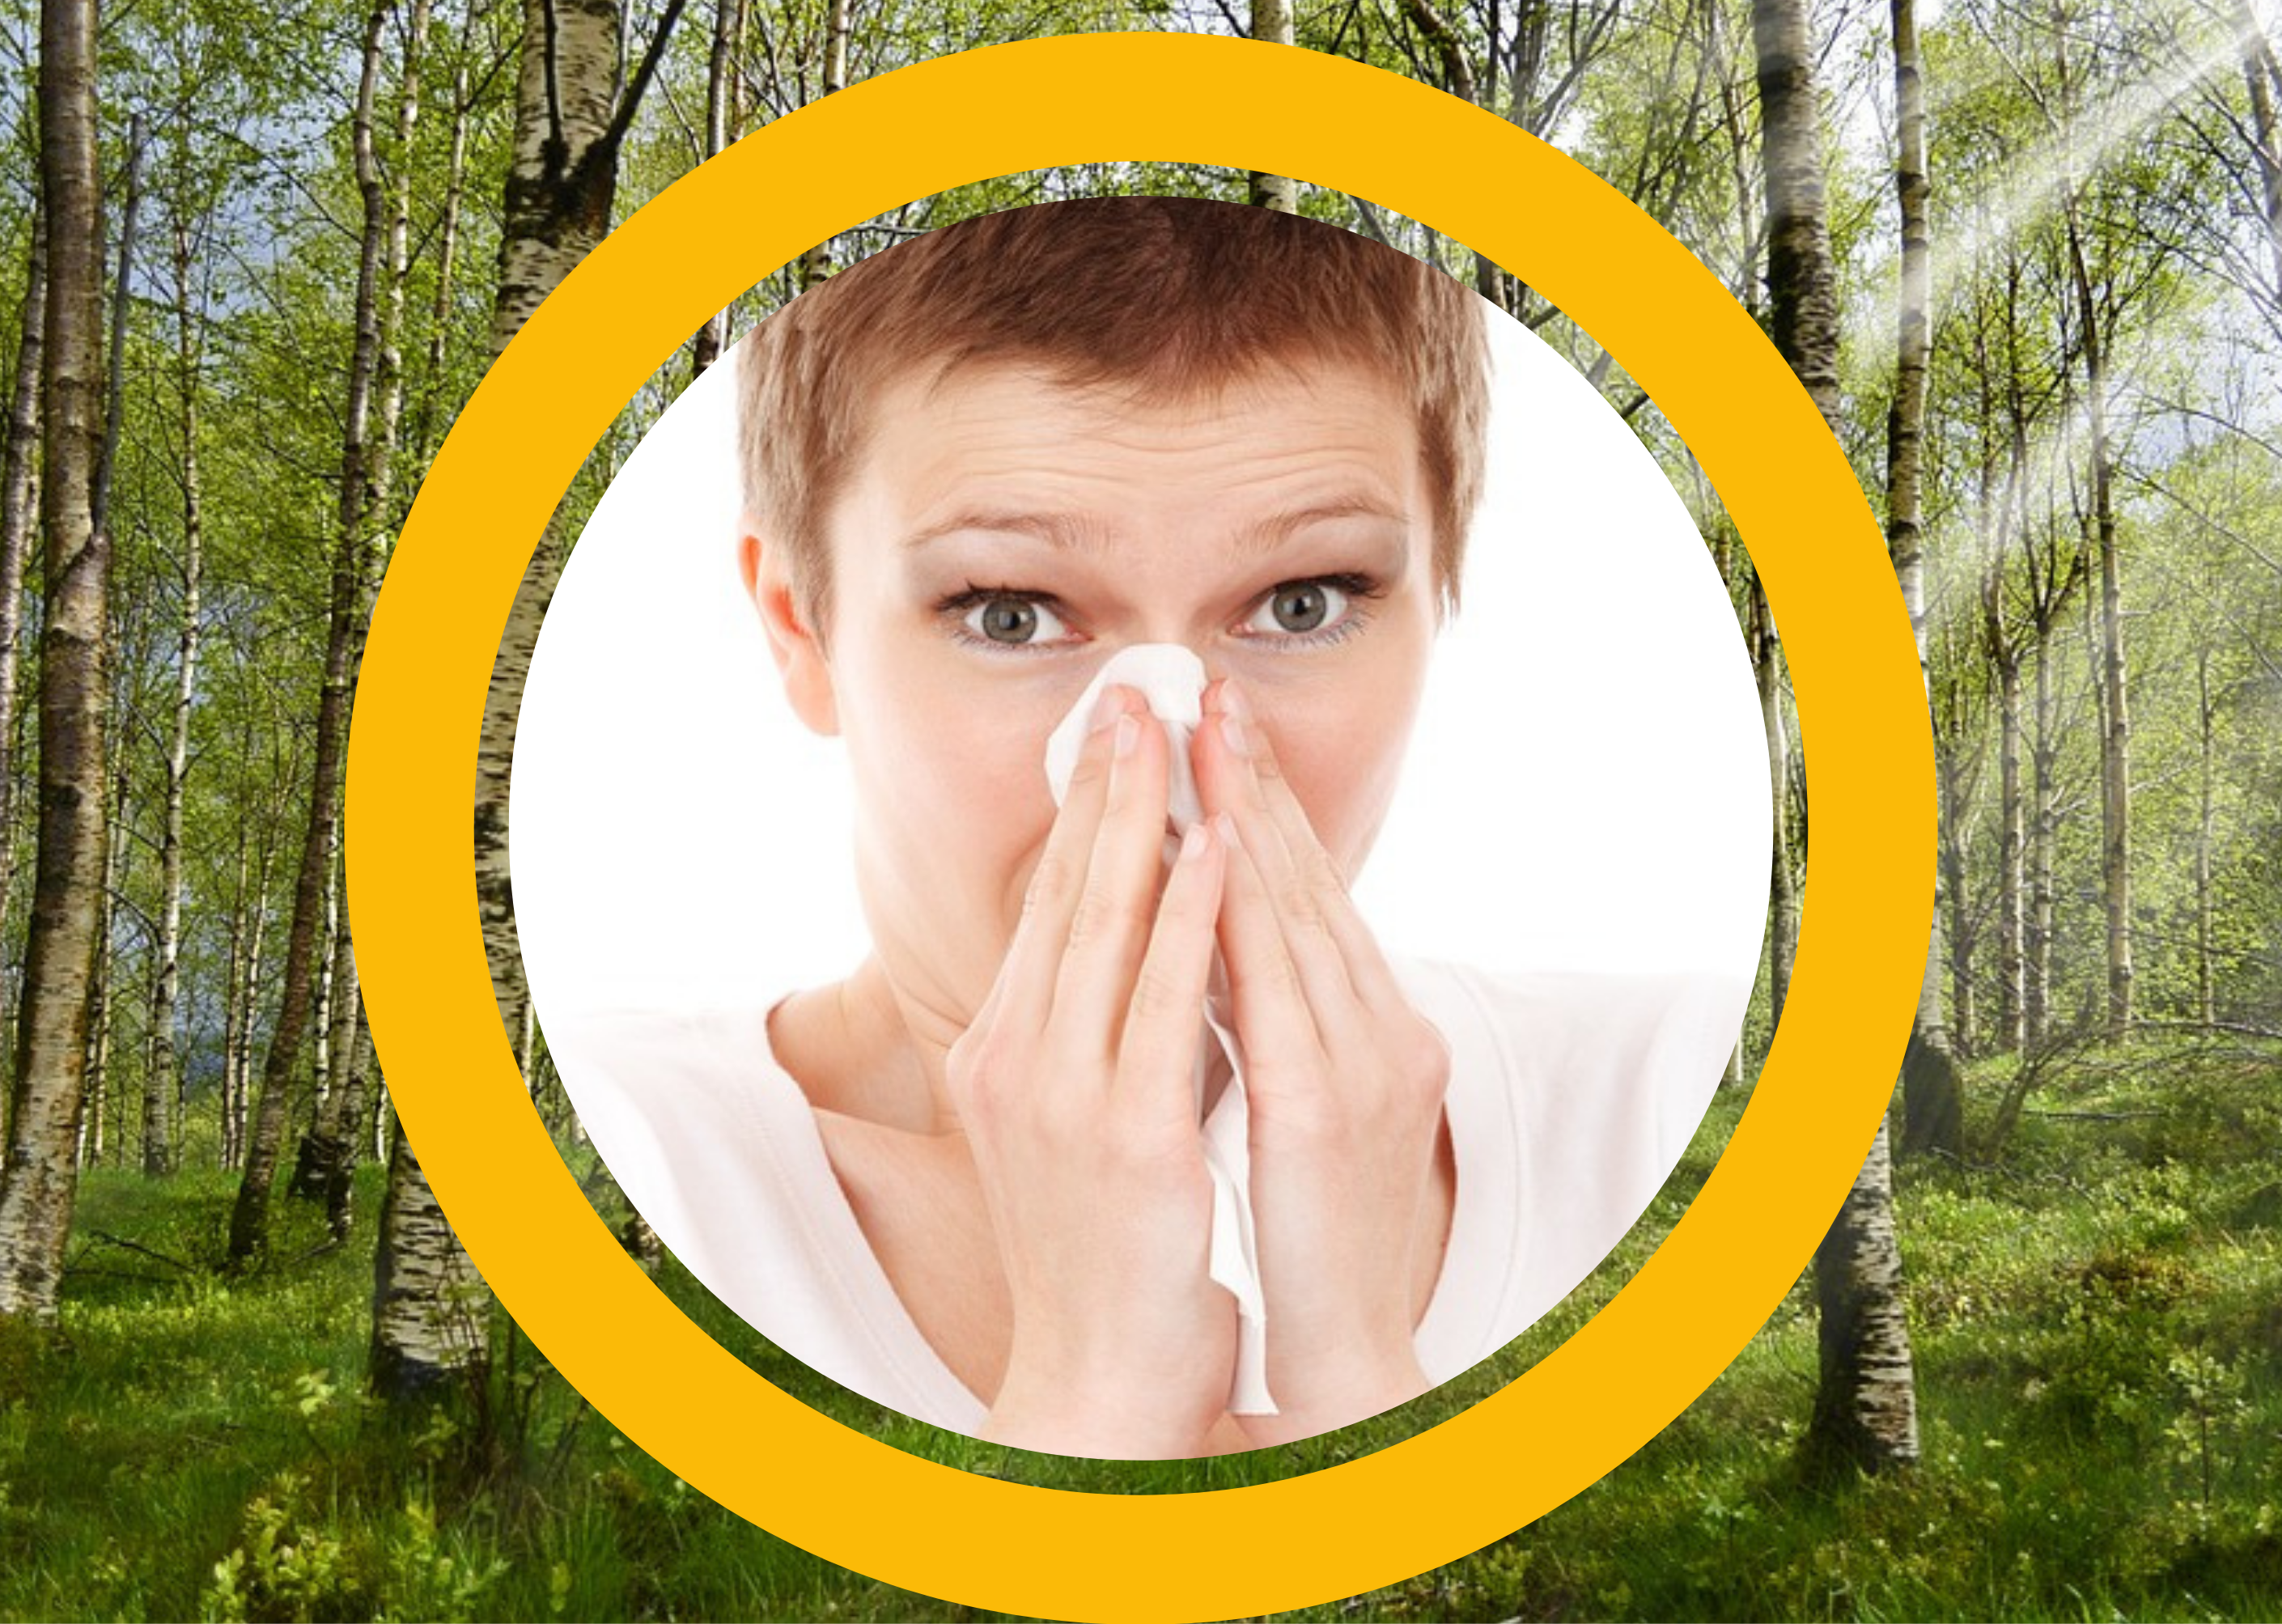 NEWS | It’s set to be a nightmare weekend for hay fever sufferers